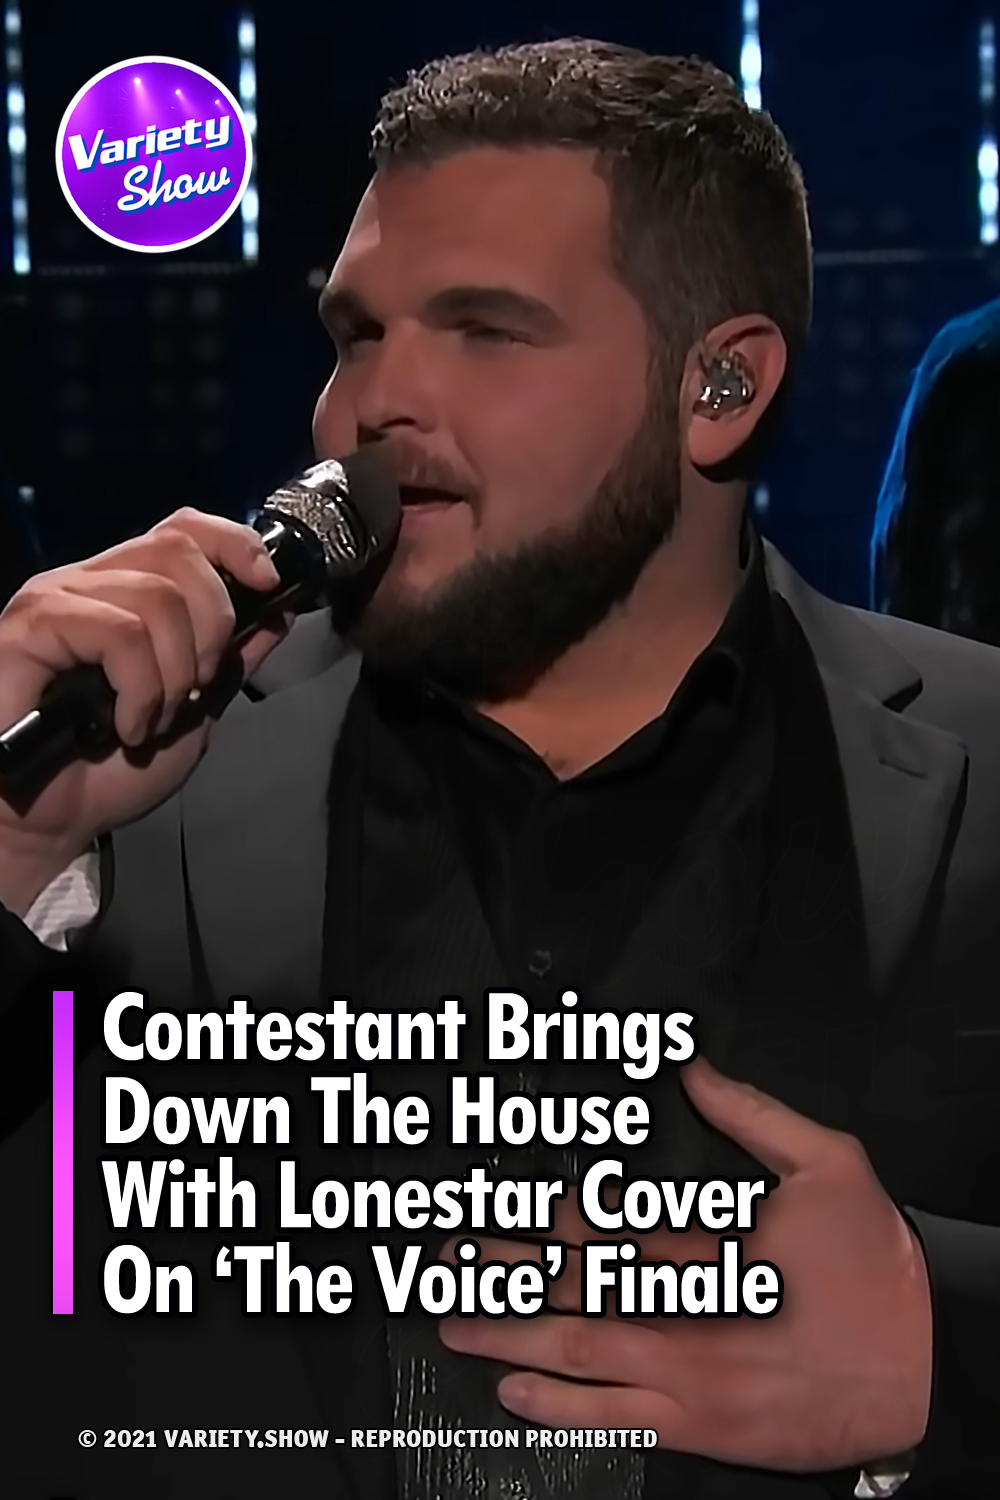 Contestant Brings Down The House With Lonestar Cover On ‘The Voice’ Finale